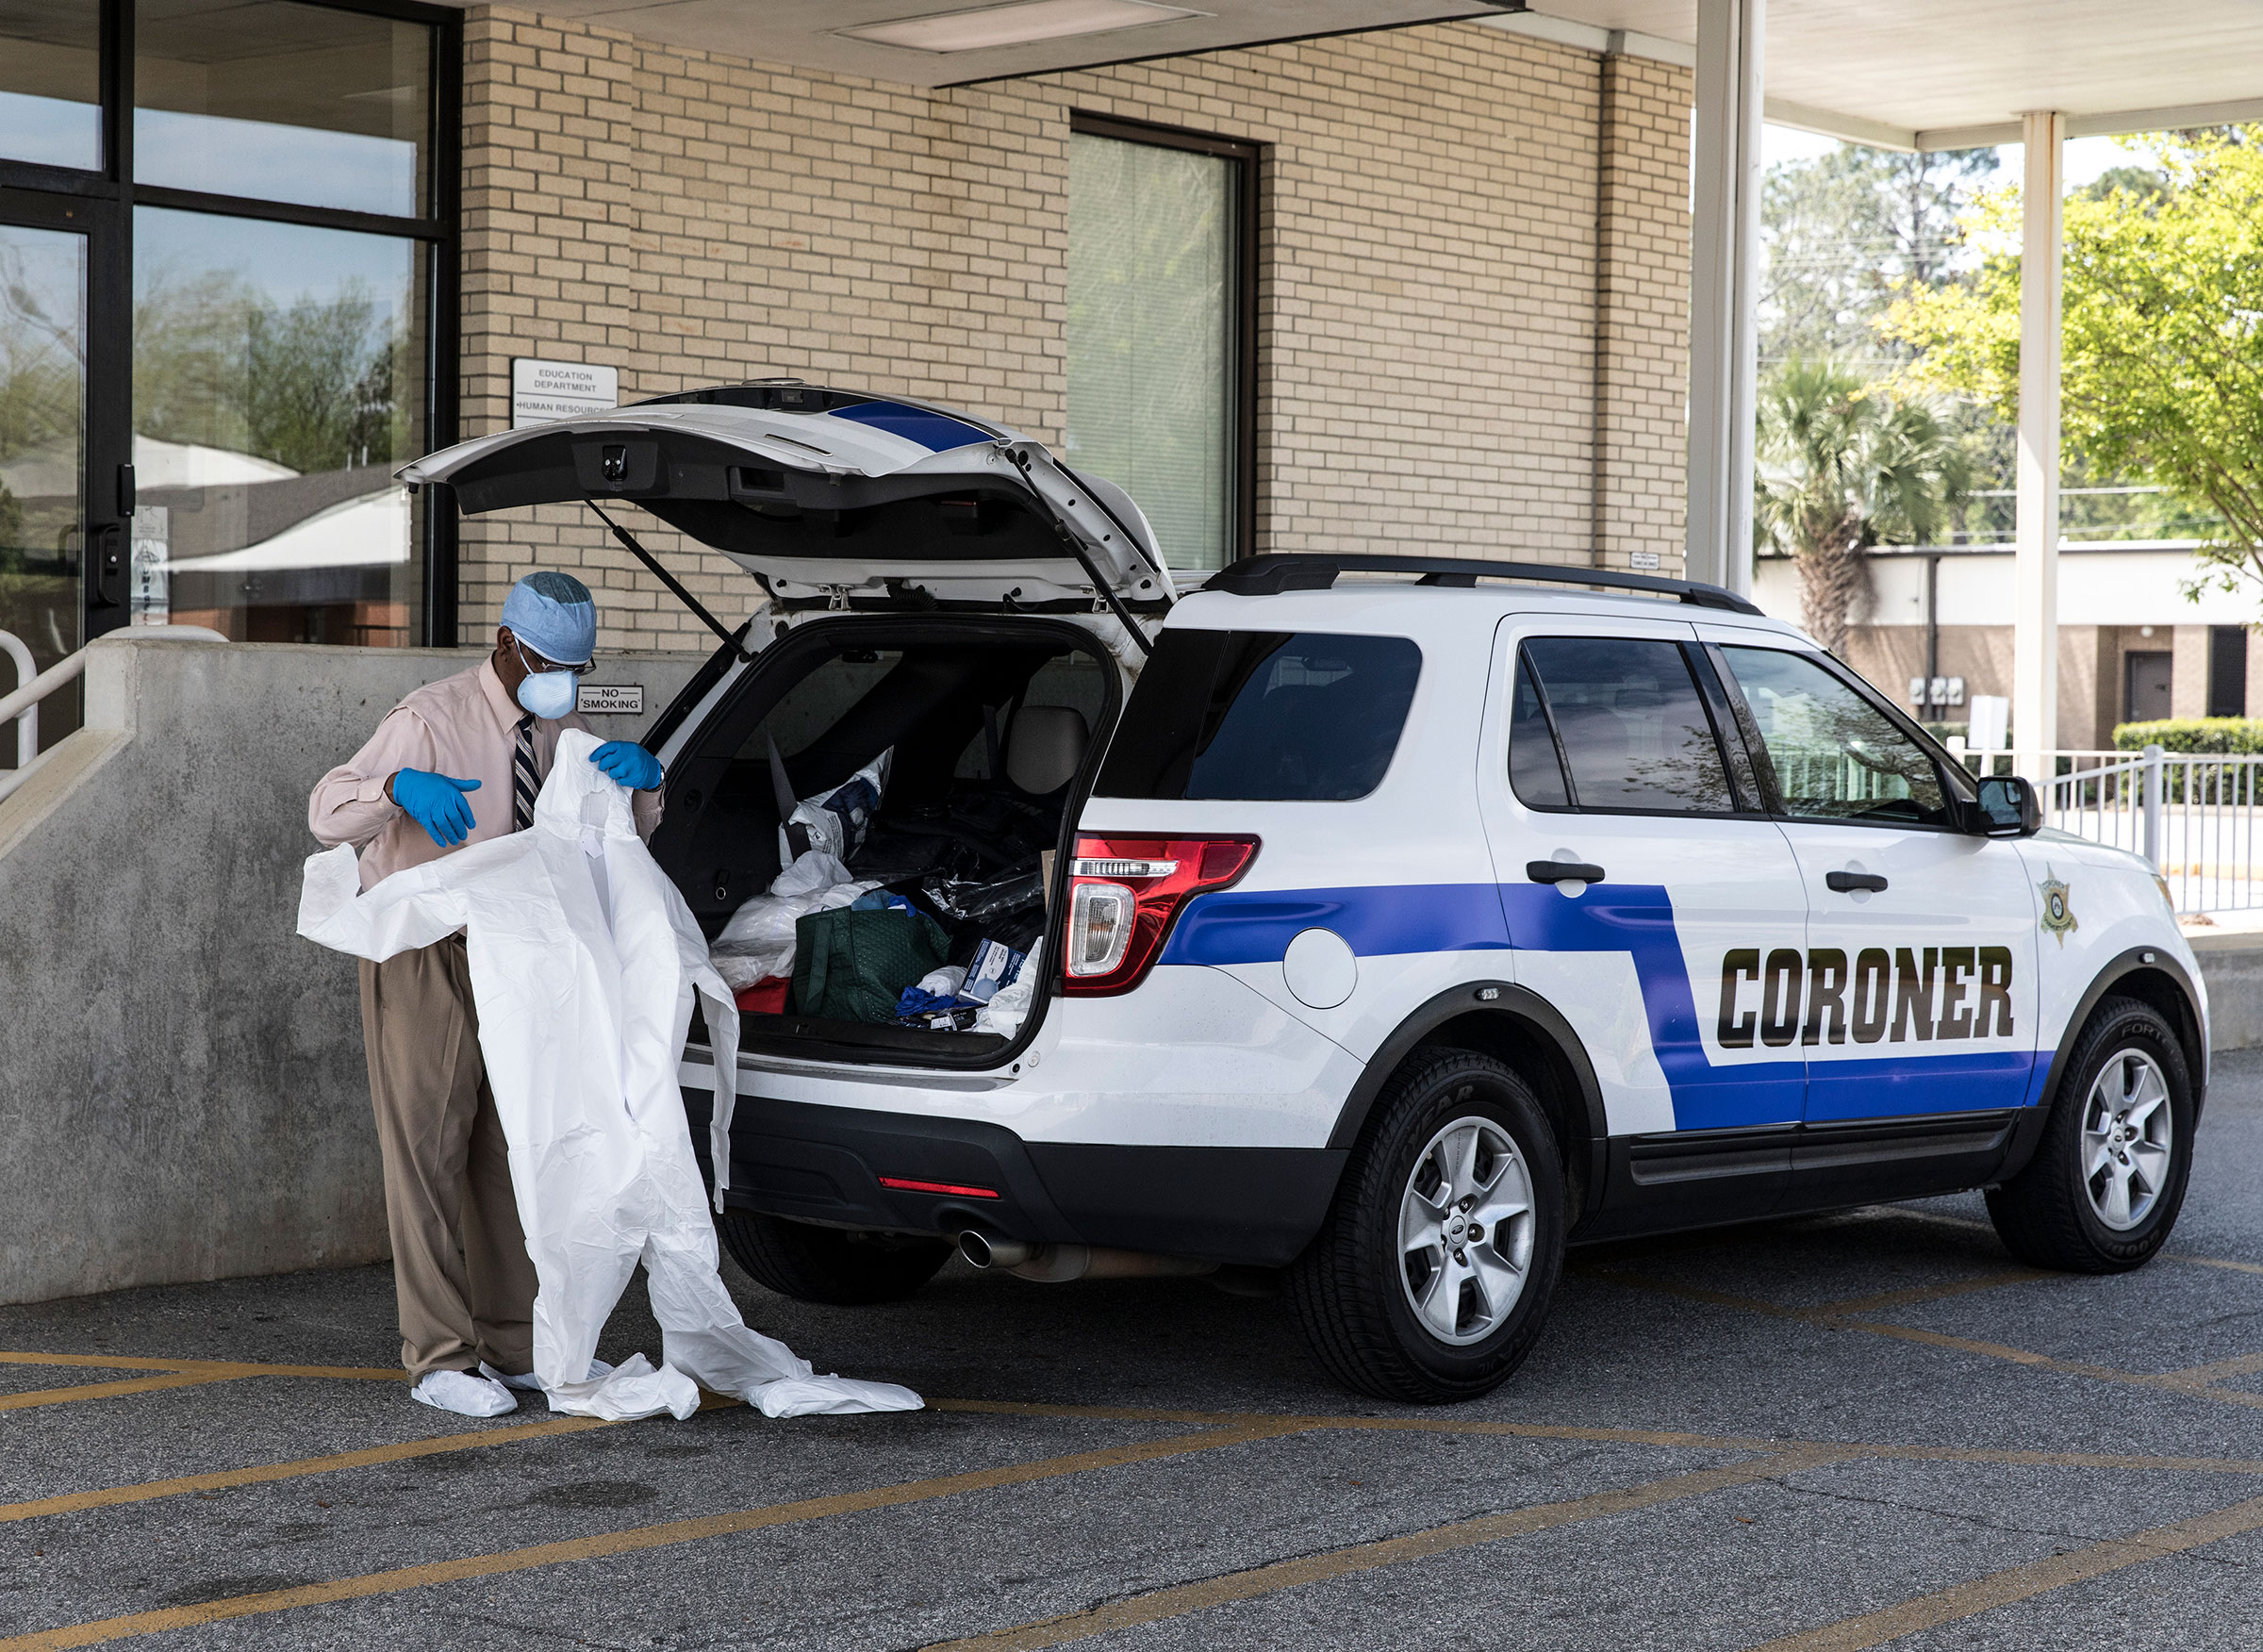 Michael Fowler is the coroner of Dougherty County, Ga. The county had the most coronavirus-related deaths in the state as of April 8, 2020. (Christopher Morris)